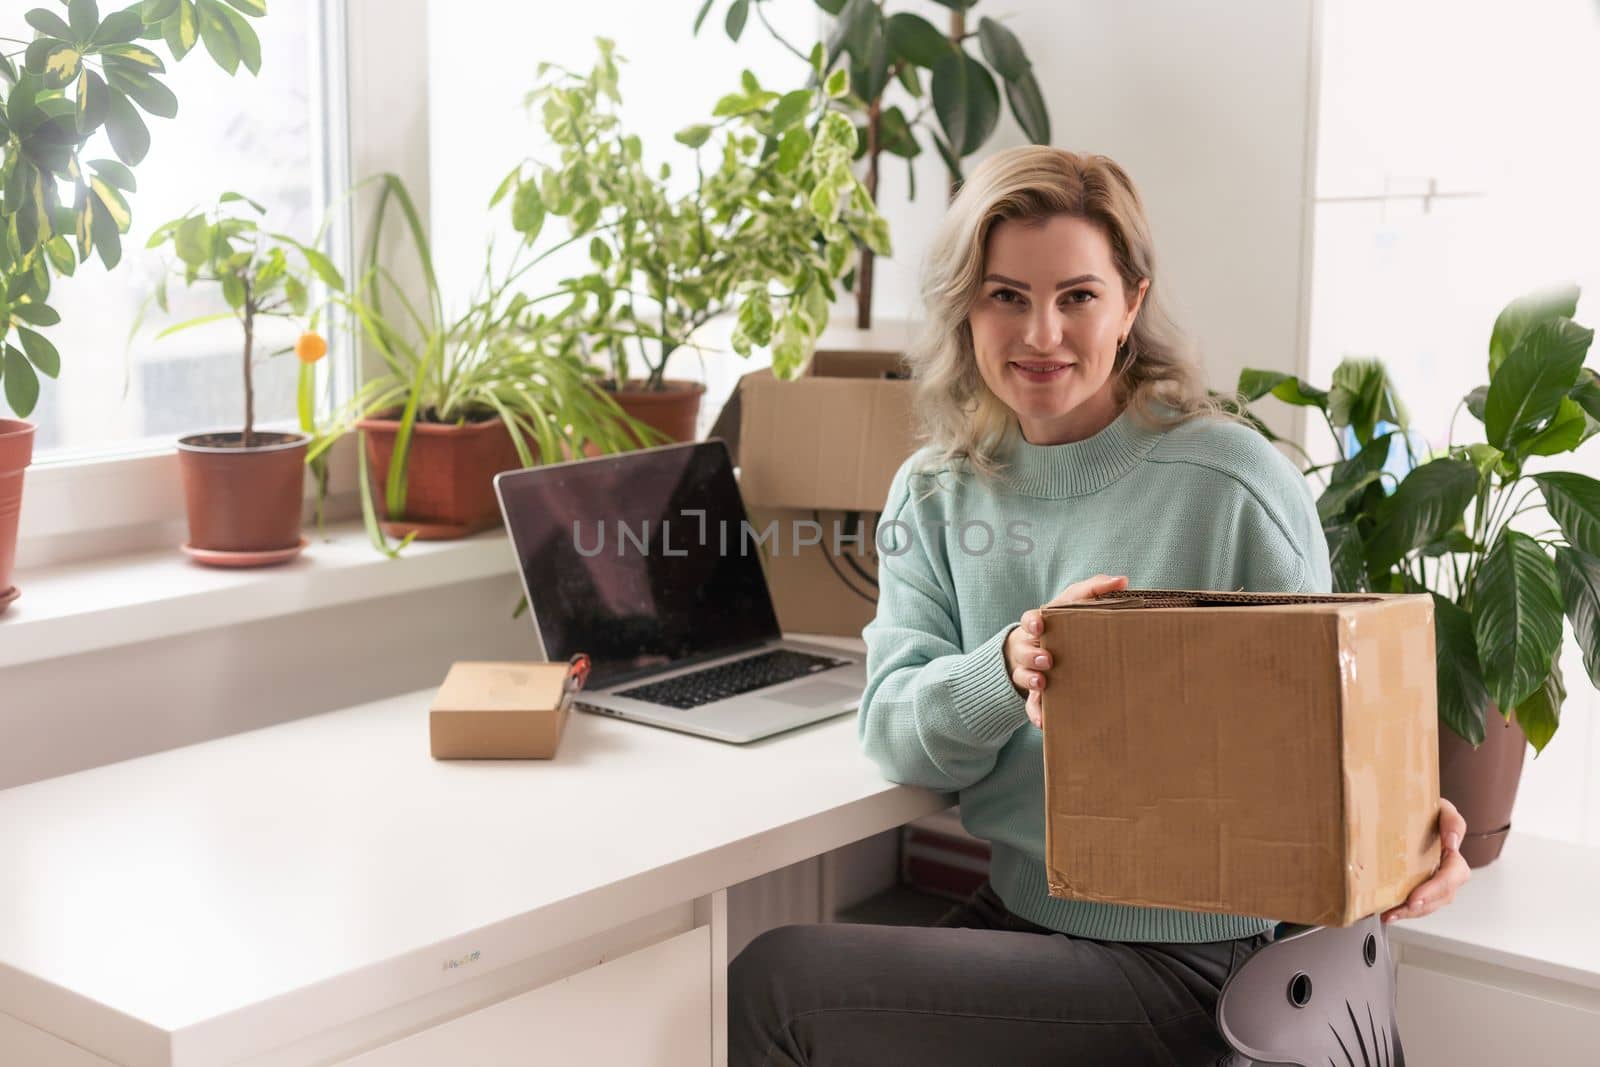 Small start-up business owners are packing boxes. To deliver to customers, salespeople, check production orders. Pack products, send to customers, sell ecommerce delivery ideas by Andelov13